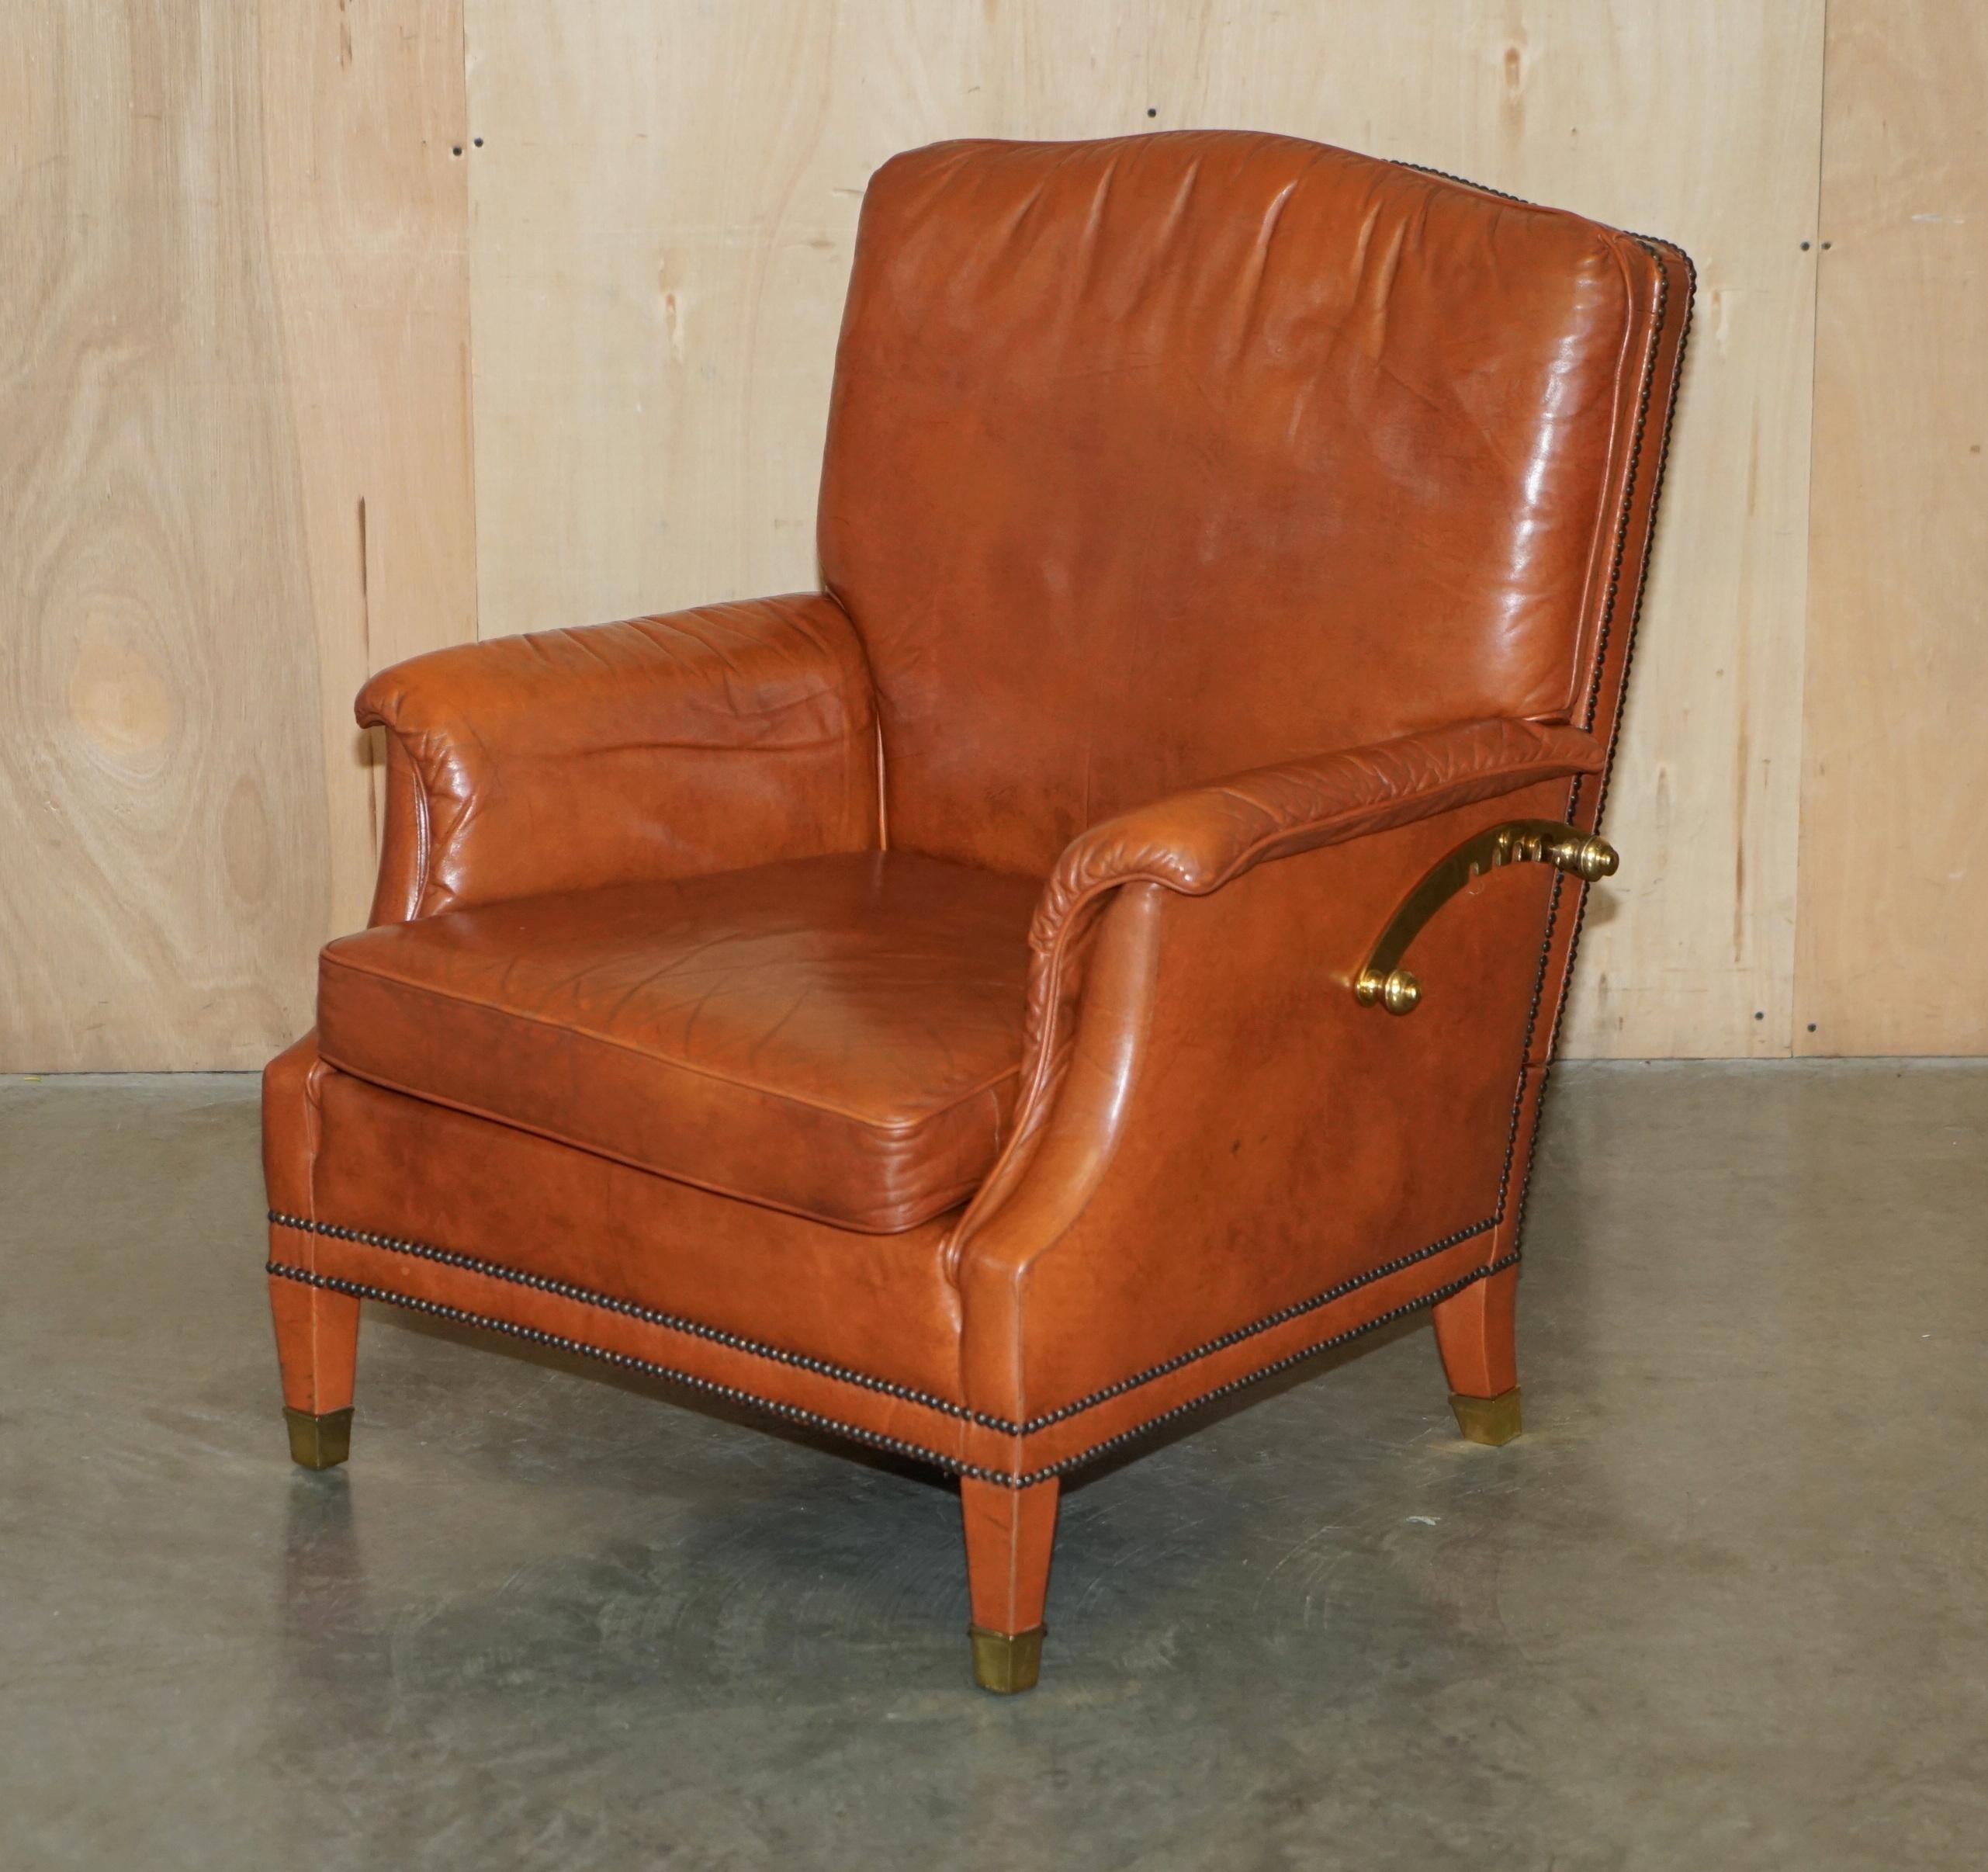 COMFORTABLE PAiR OF FRENCH NEOCLASSICAL STYLE LEATHER & BRASS RECLINER ARMCHAIRS For Sale 12